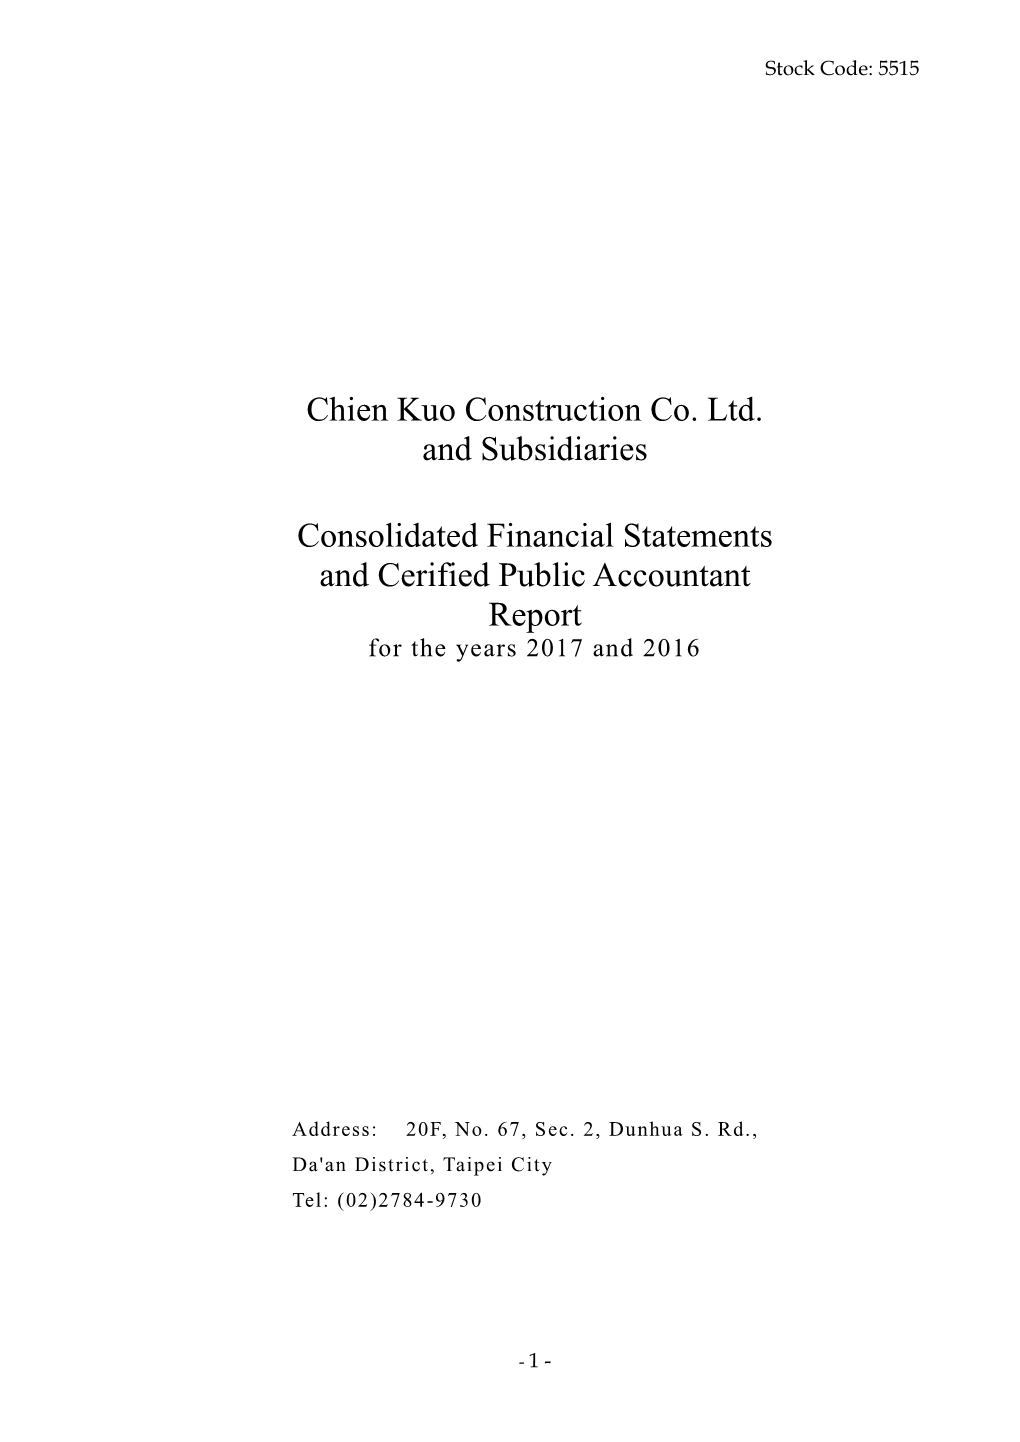 Chien Kuo Construction Co. Ltd. and Subsidiaries Consolidated Balance Sheets for the Years Ended December 31, 2017 and 2016 Unit: in Thousands of New Taiwan Dollars